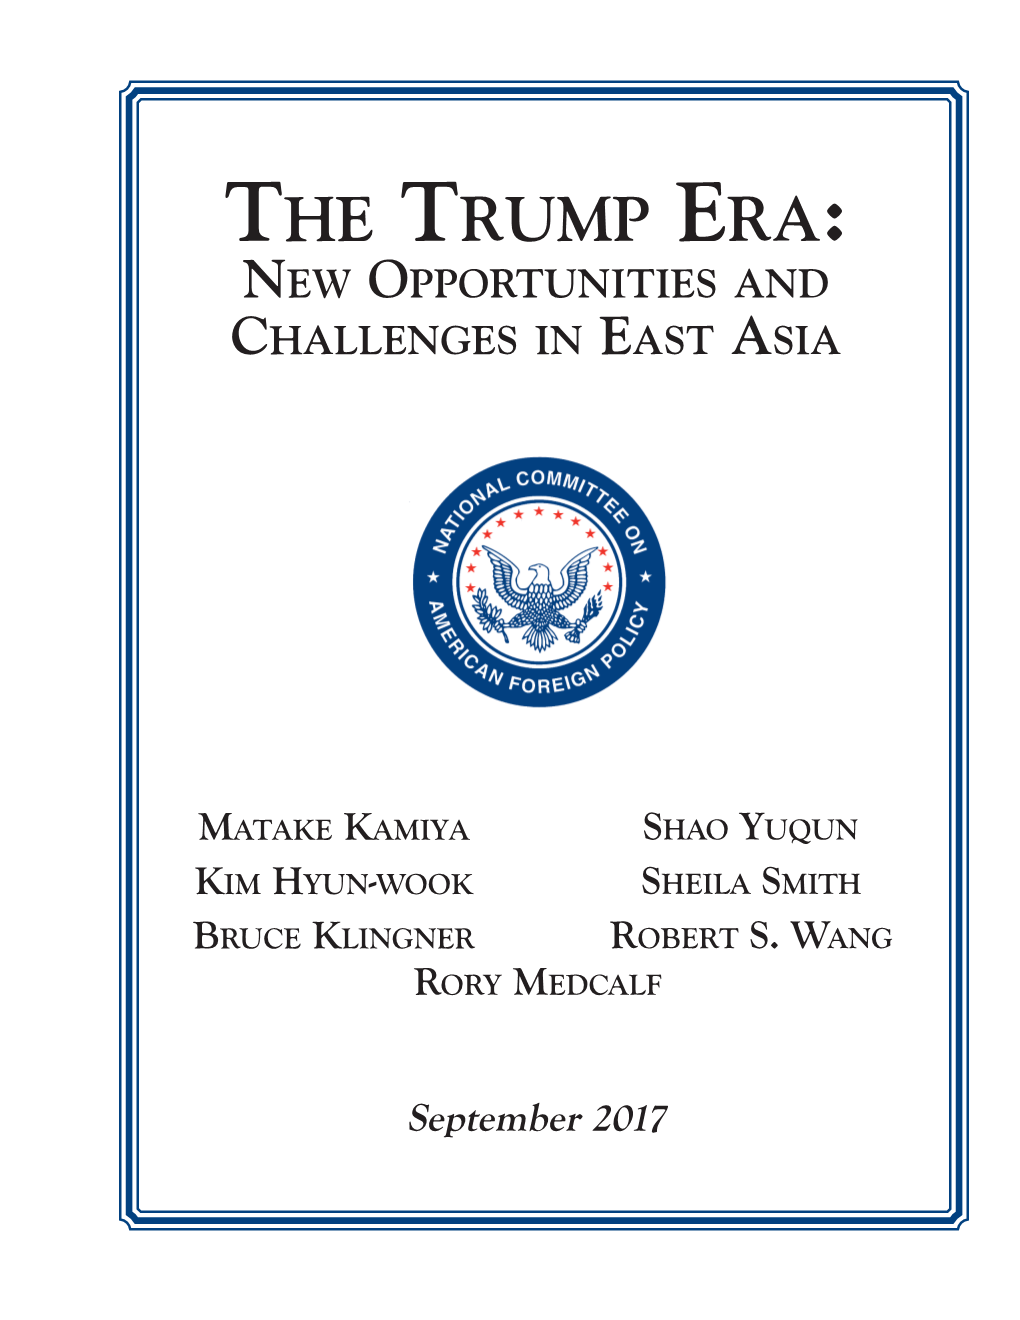 The Trump Era: New Opportunities and Challenges in East Asia